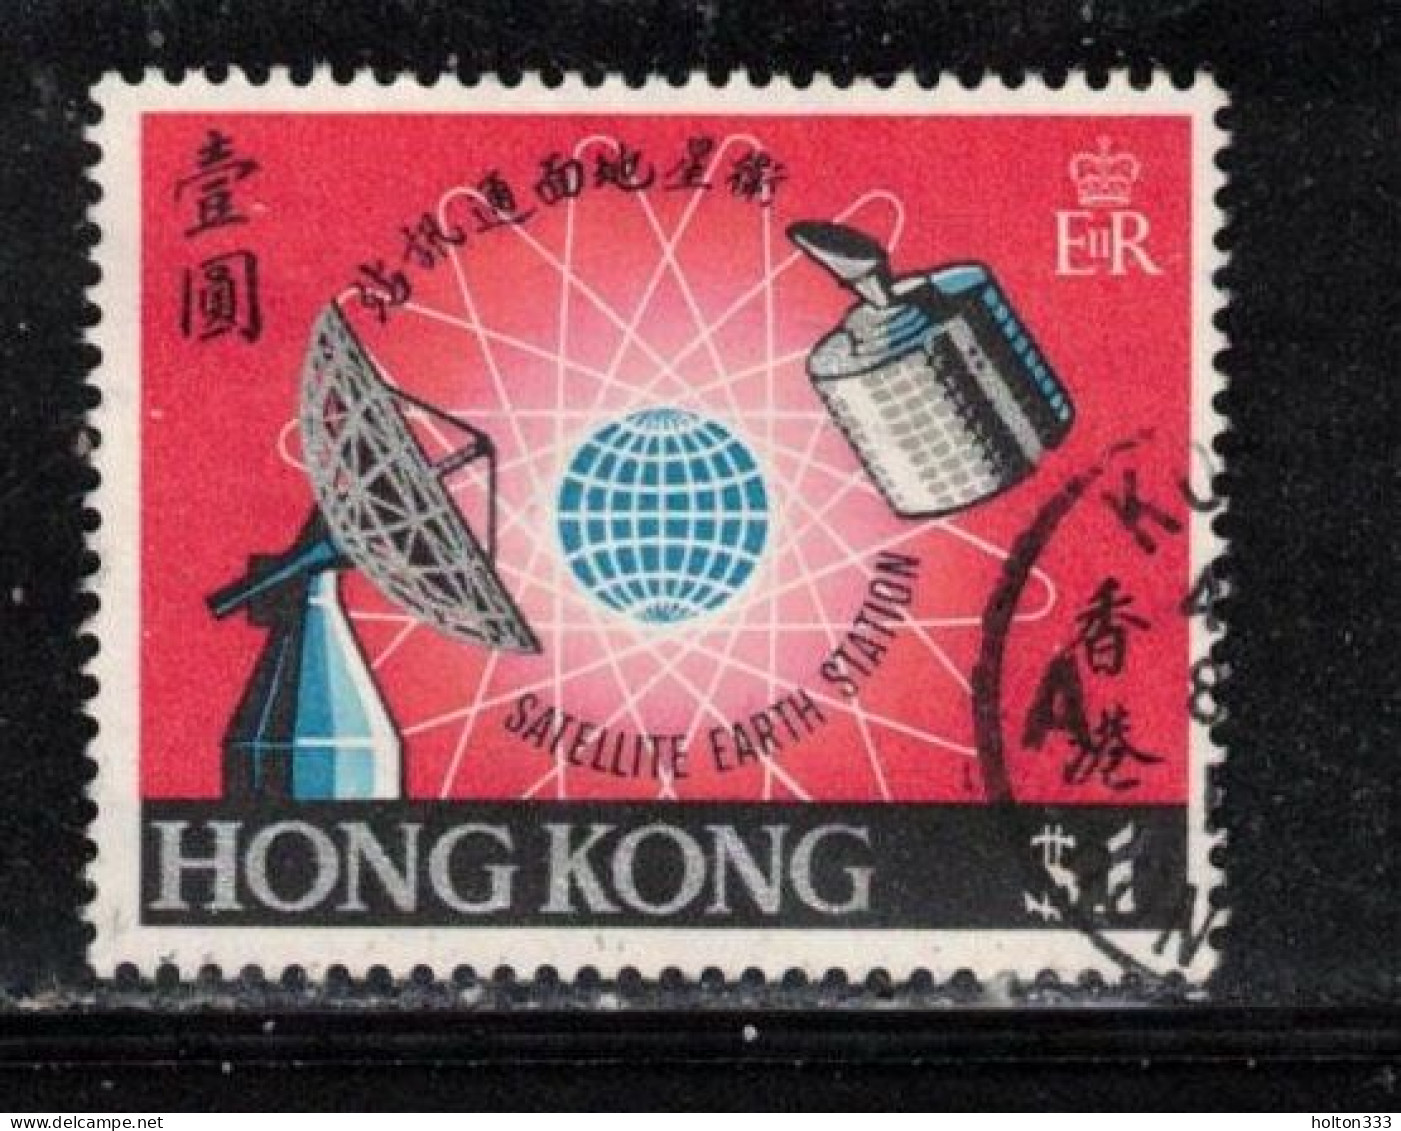 HONG KONG Scott # 252 Used - Satellite Earth Station - Used Stamps